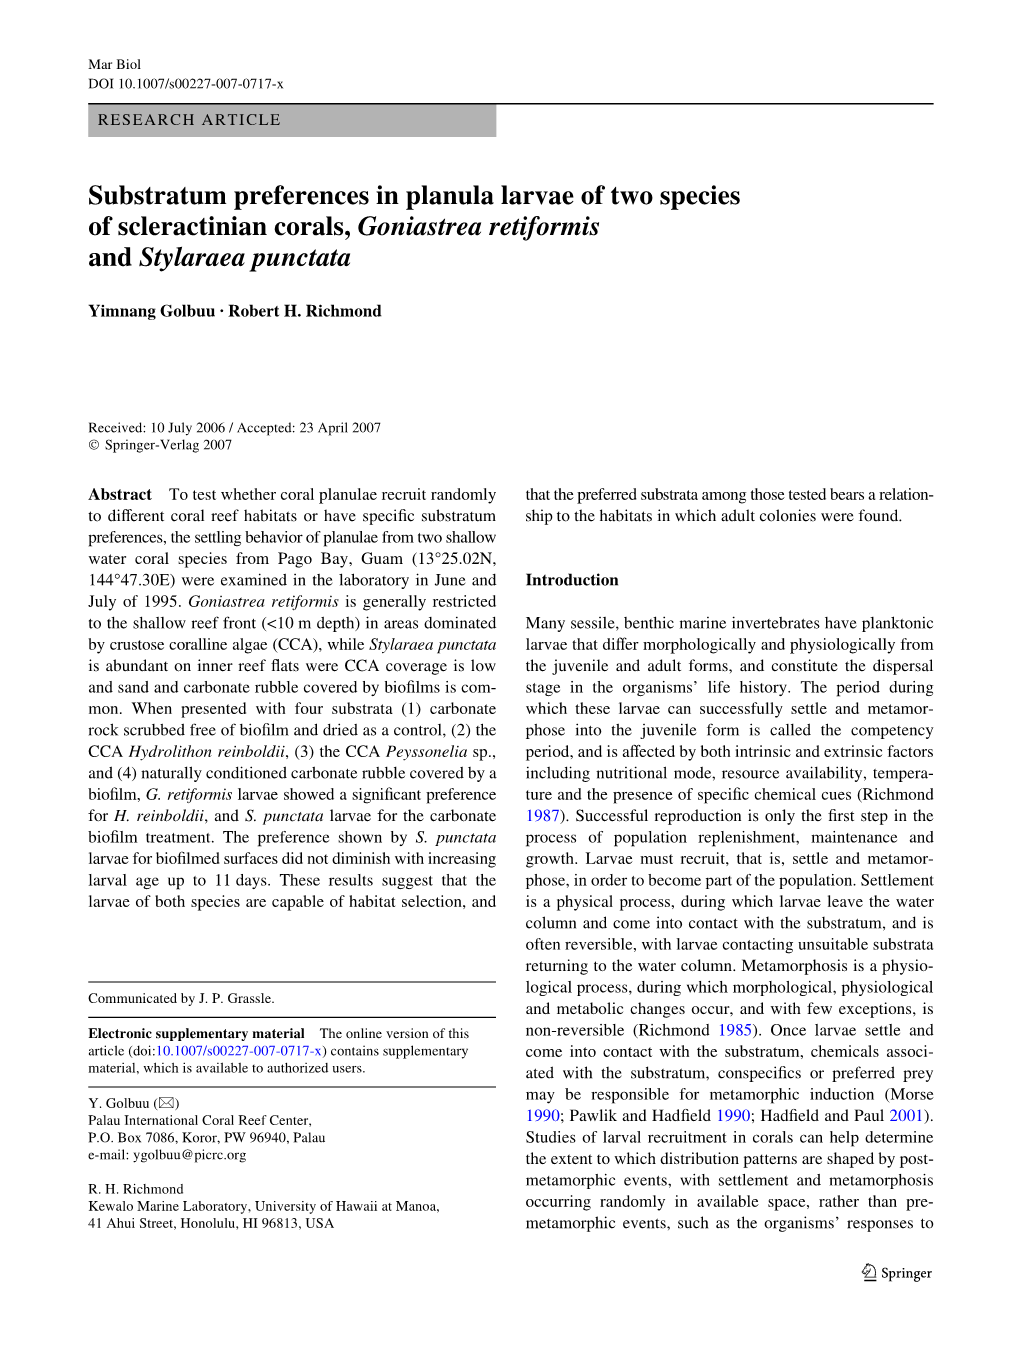 Substratum Preferences in Planula Larvae of Two Species of Scleractinian Corals, Goniastrea Retiformis and Stylaraea Punctata